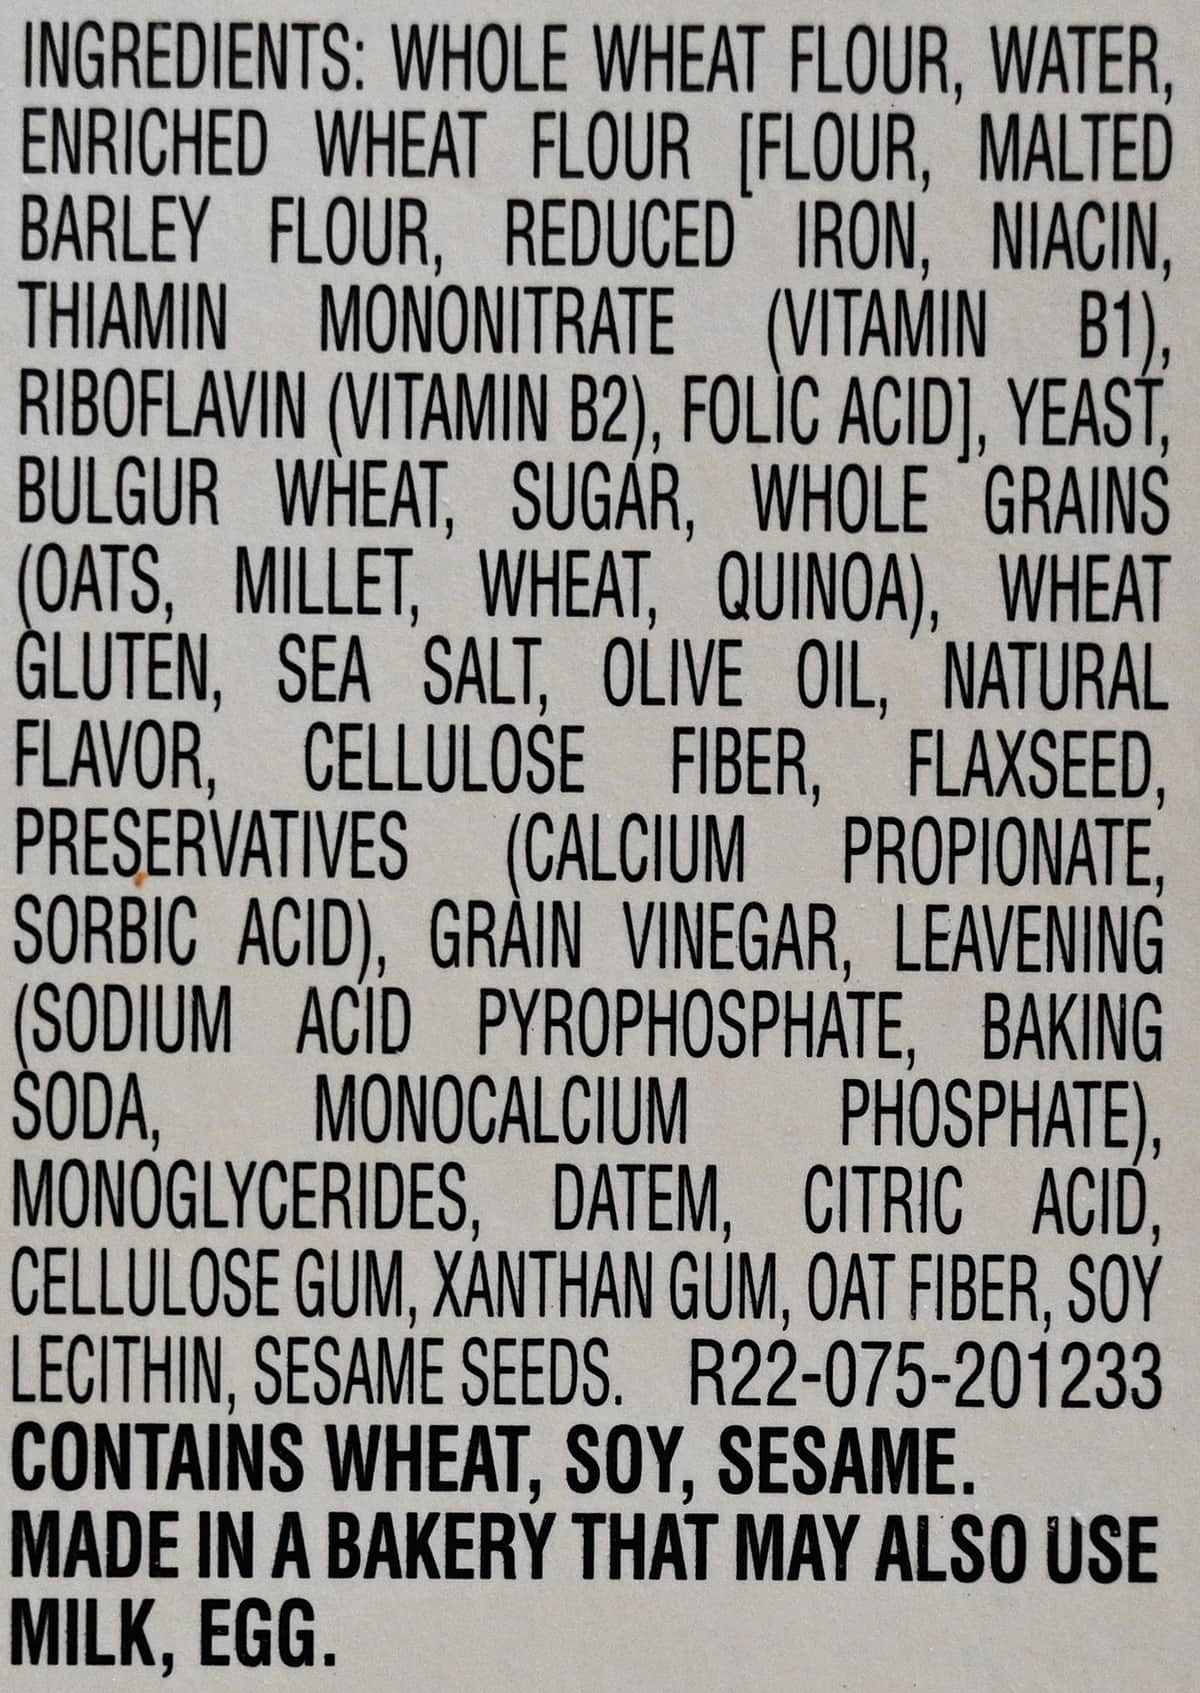 Image of the sandwich thin ingredients from the packaging.